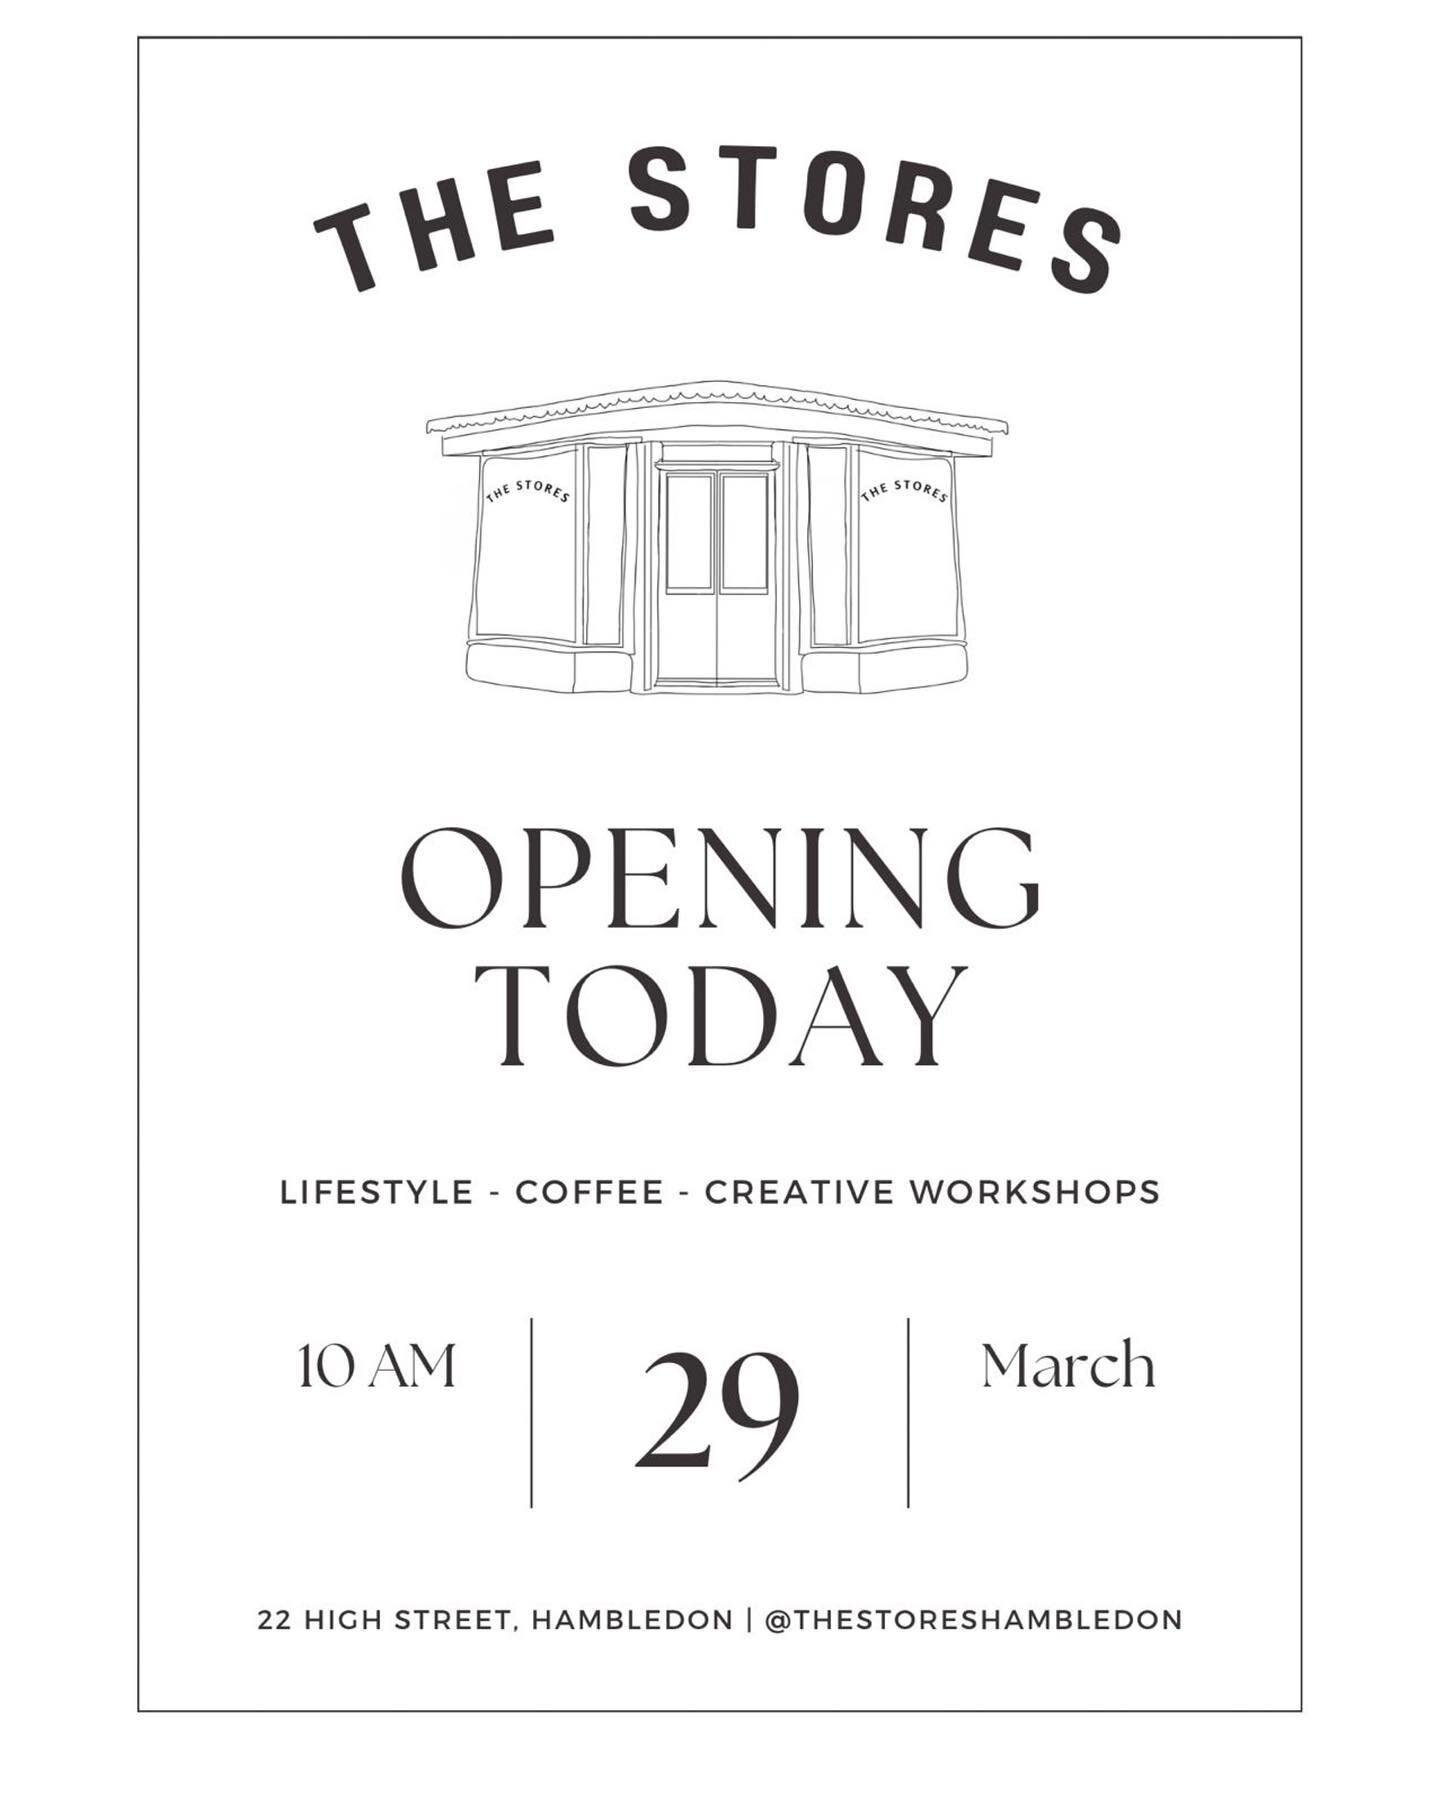 We will joyfully open our doors TODAY at 10am welcoming you for espresso, baked goods and a browse of our gorgeous selection of treasures for your home 🫶🏼

Come and see us between 10-4pm today and tomorrow at 22 High Street, Hambledon.

A&amp;C x